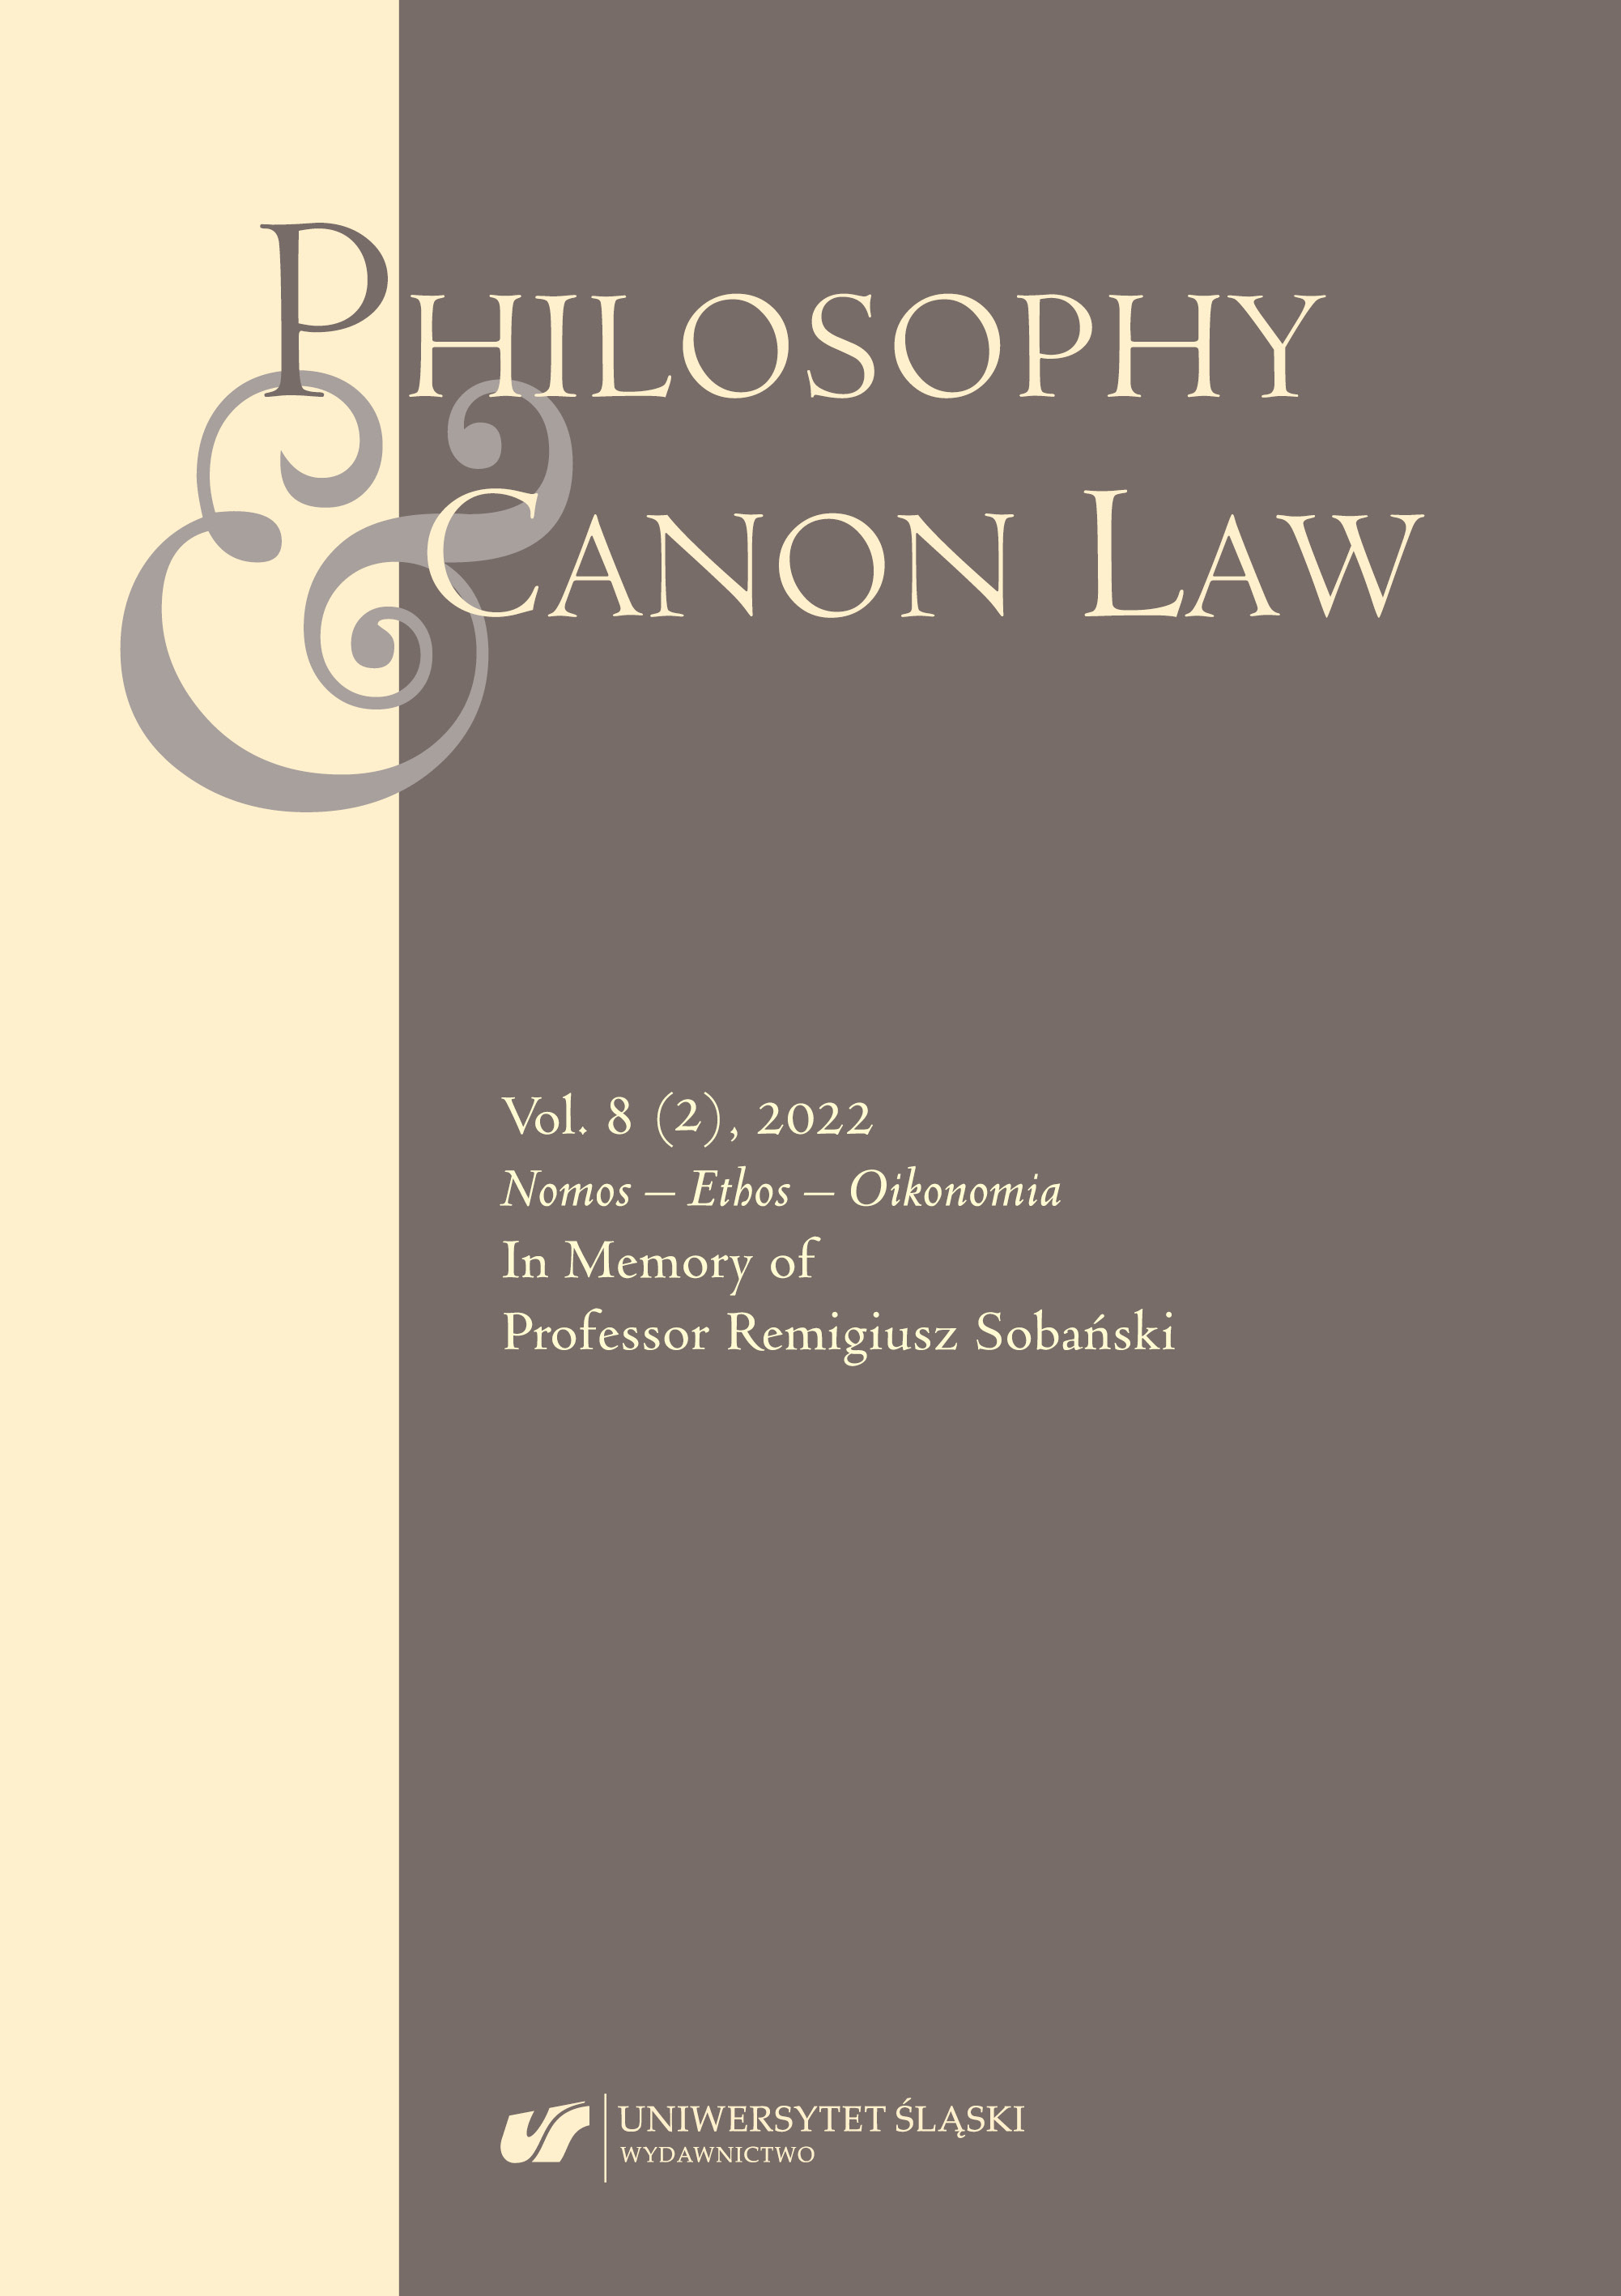 Theology of Canon Law According to Professor Remigiusz Sobański